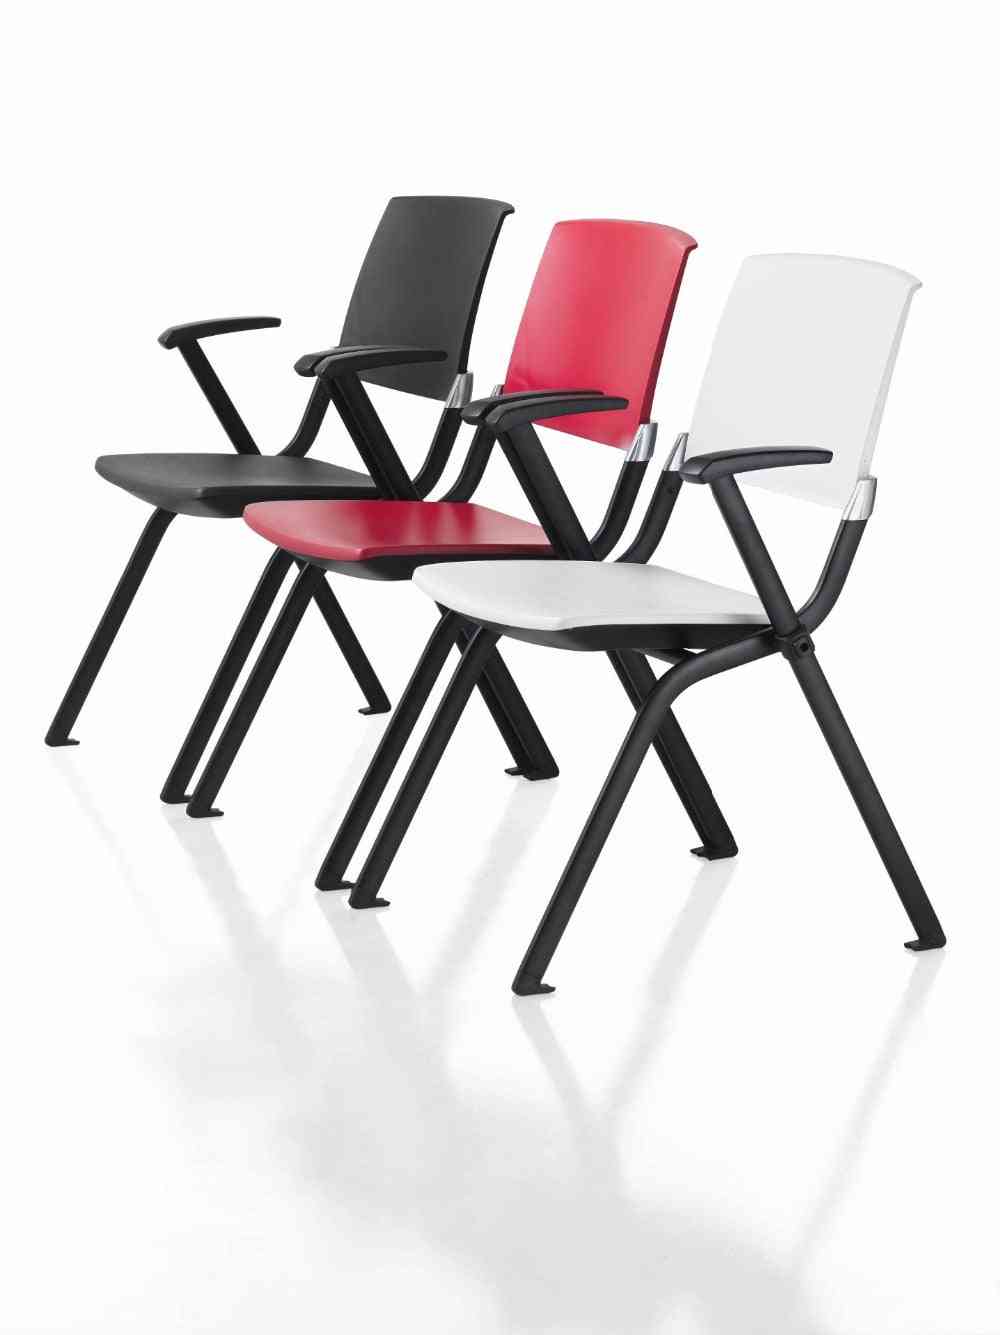 Folding Chair With Writing Board For Office, Home